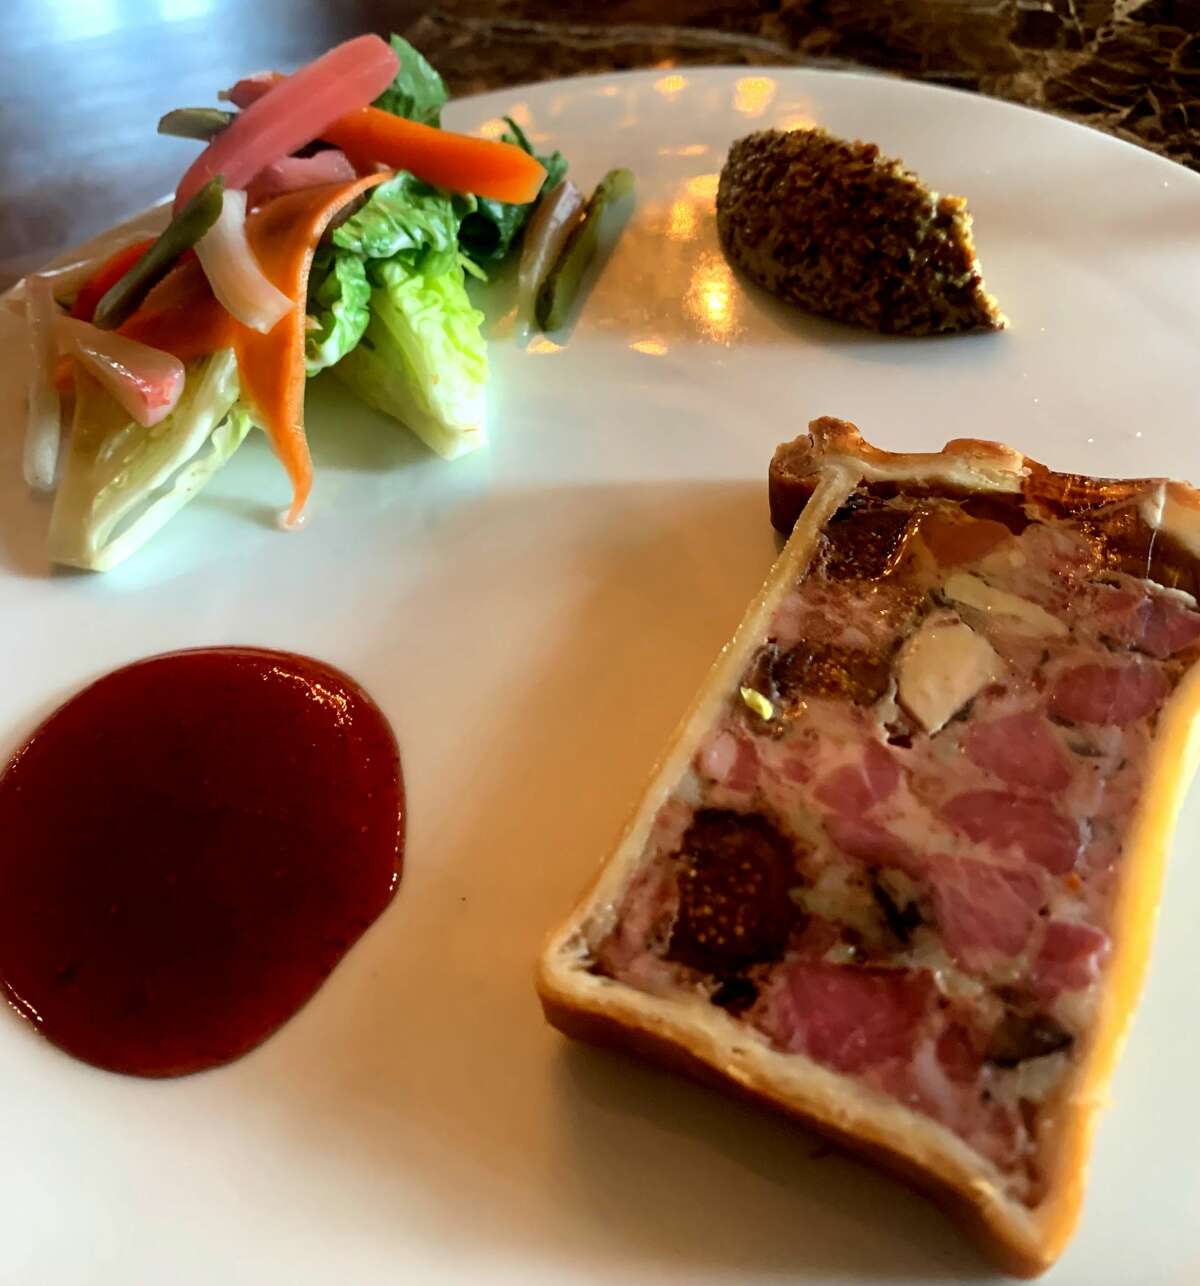 Pastry-clad duck paté at Cafe Boulud at Blantyre.